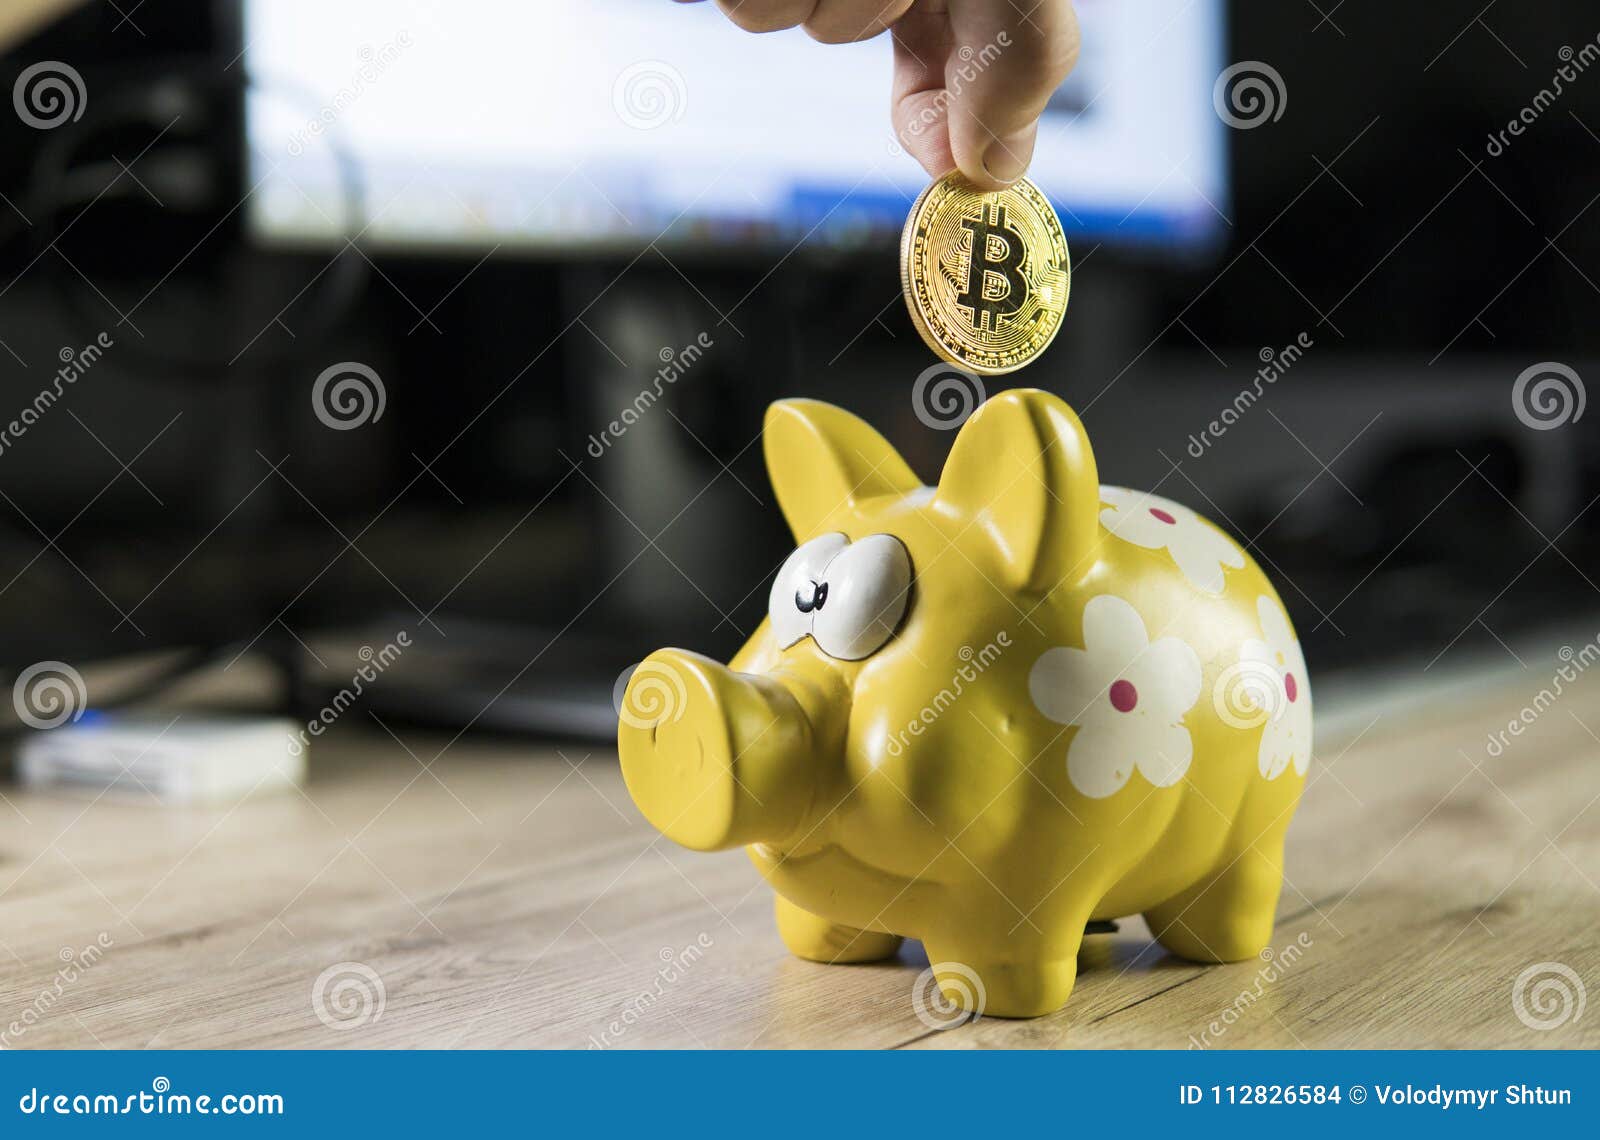 Hand Putting Golden Bitcoin In To Piggy Bank Money Box With A - 